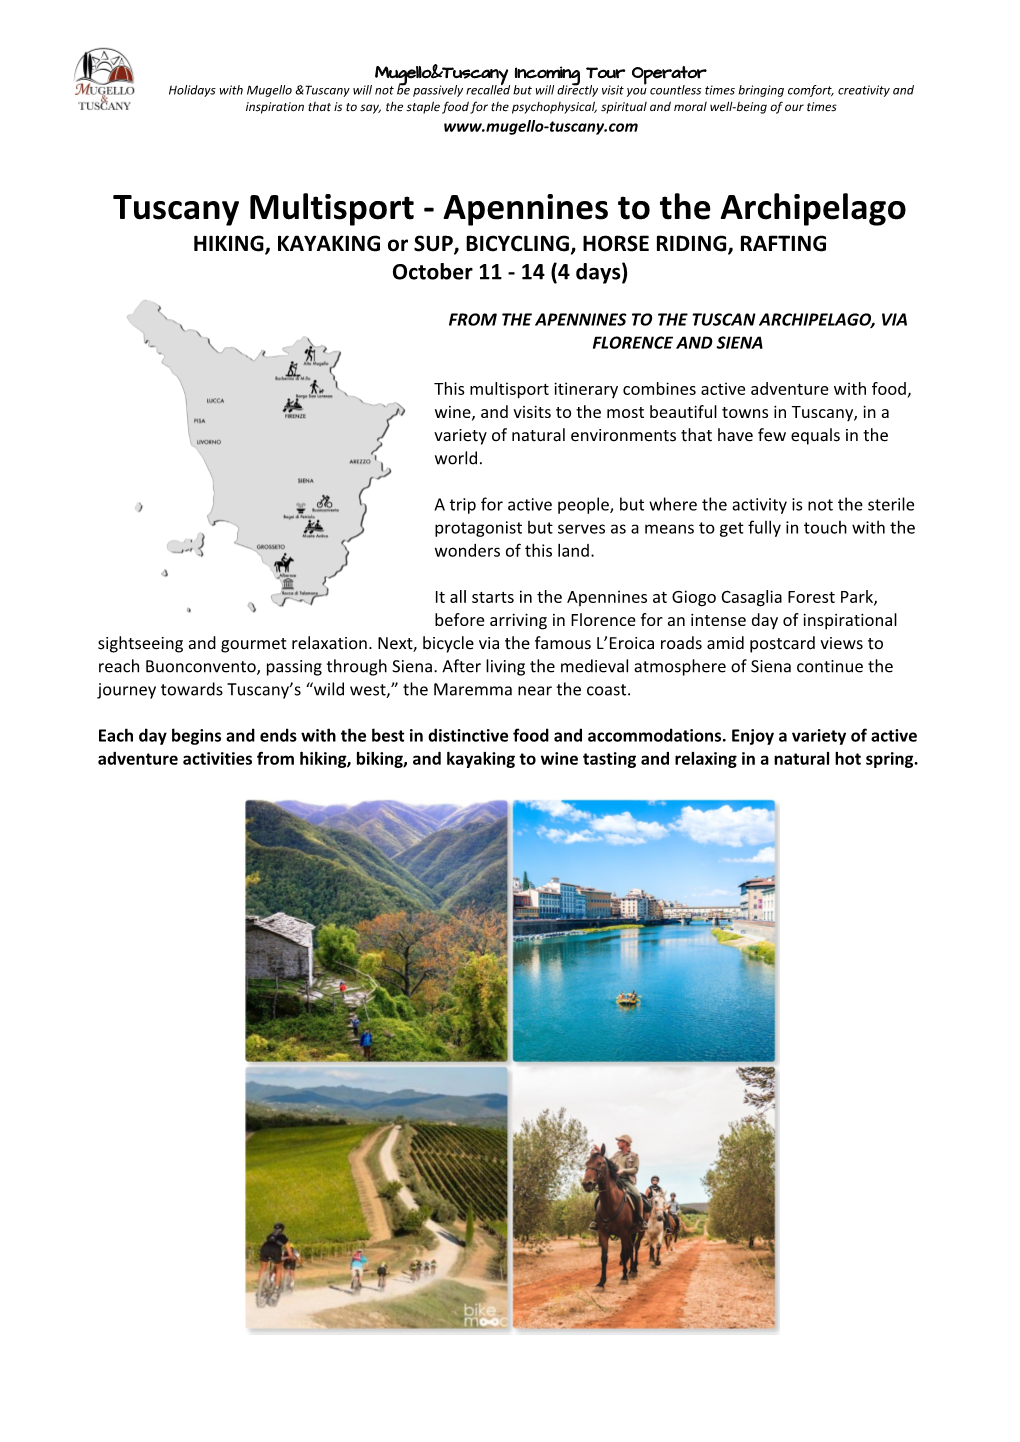 Tuscany Multisport - Apennines to the Archipelago HIKING, KAYAKING Or SUP, BICYCLING, HORSE RIDING, RAFTING October 11 - 14 (4 Days)